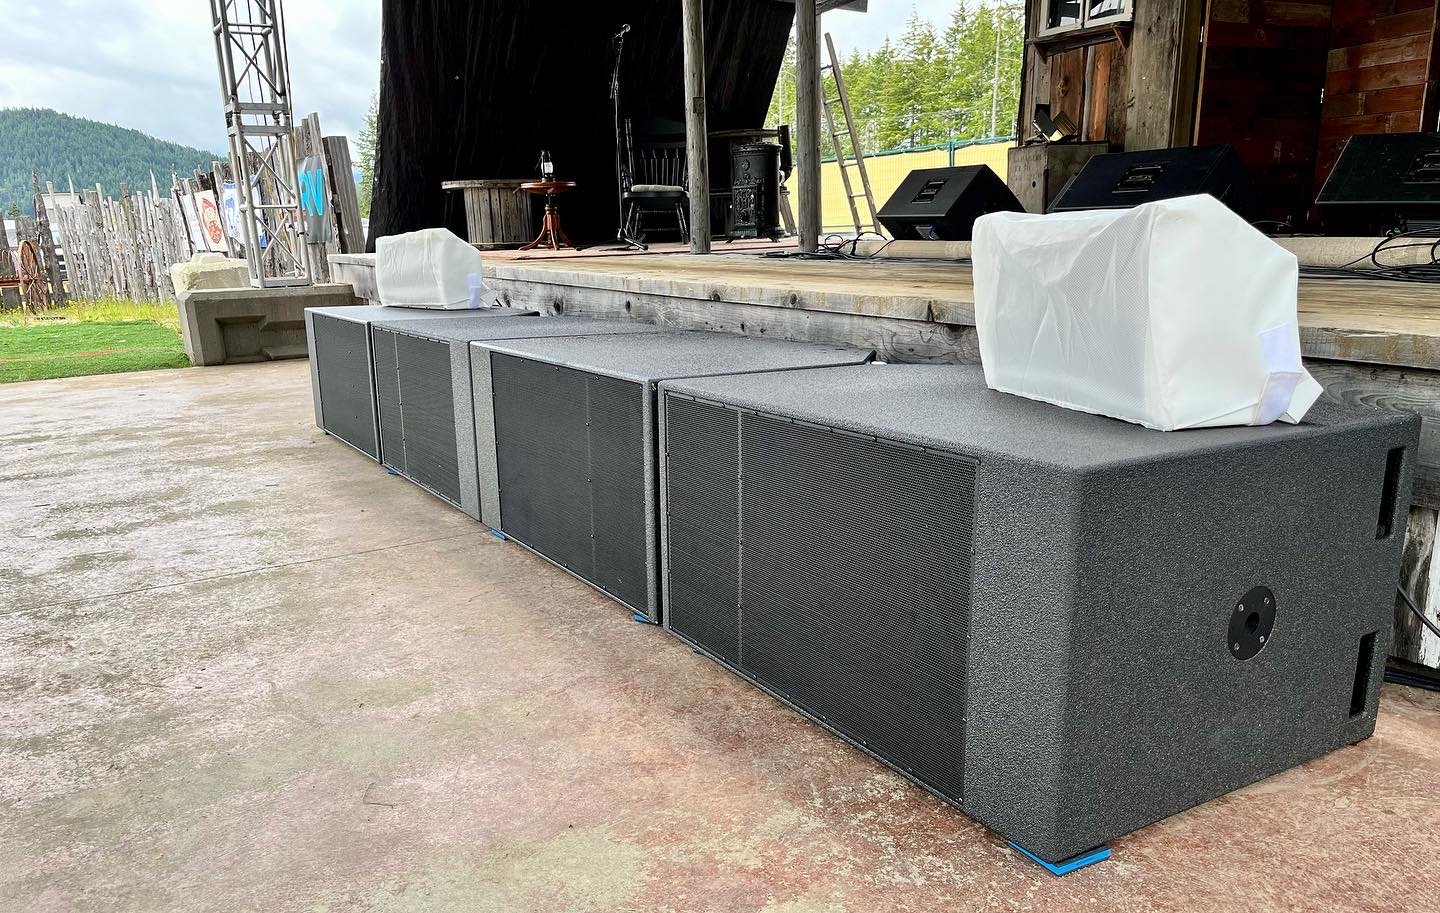 JTR Orbit Shifter Pro folded horn subwoofers and Danley GO2-8CX Lip Fills with weatherproof covers, Cowichan Valley Bluegrass Festival, Laketown Ranch Lake Cowichan 2022